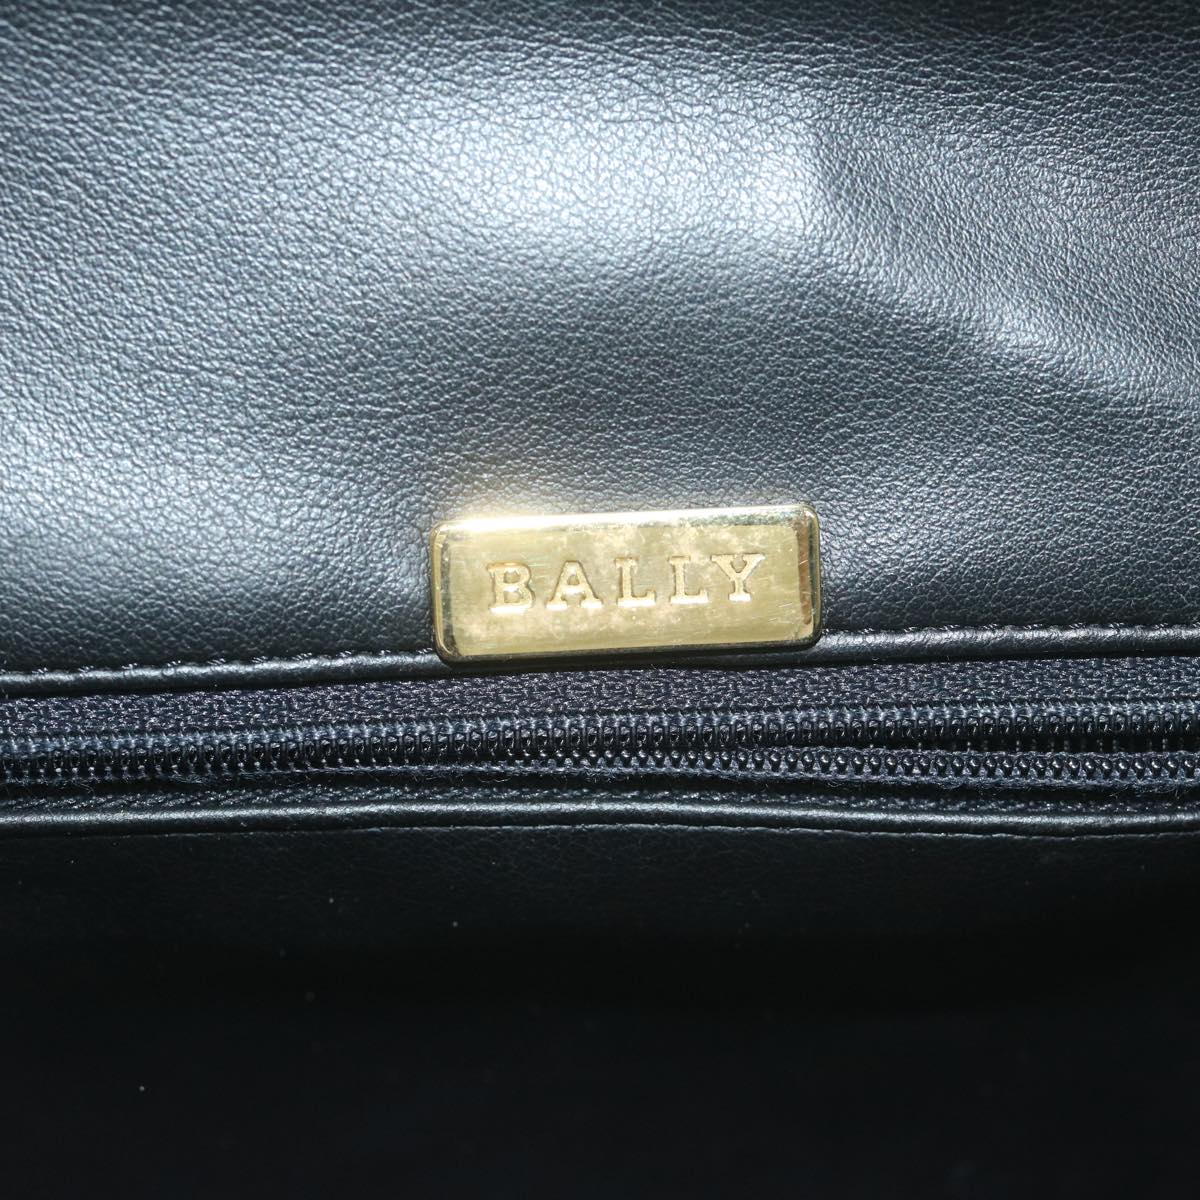 BALLY Quilted Chain Shoulder Bag Leather Black Auth yk10230